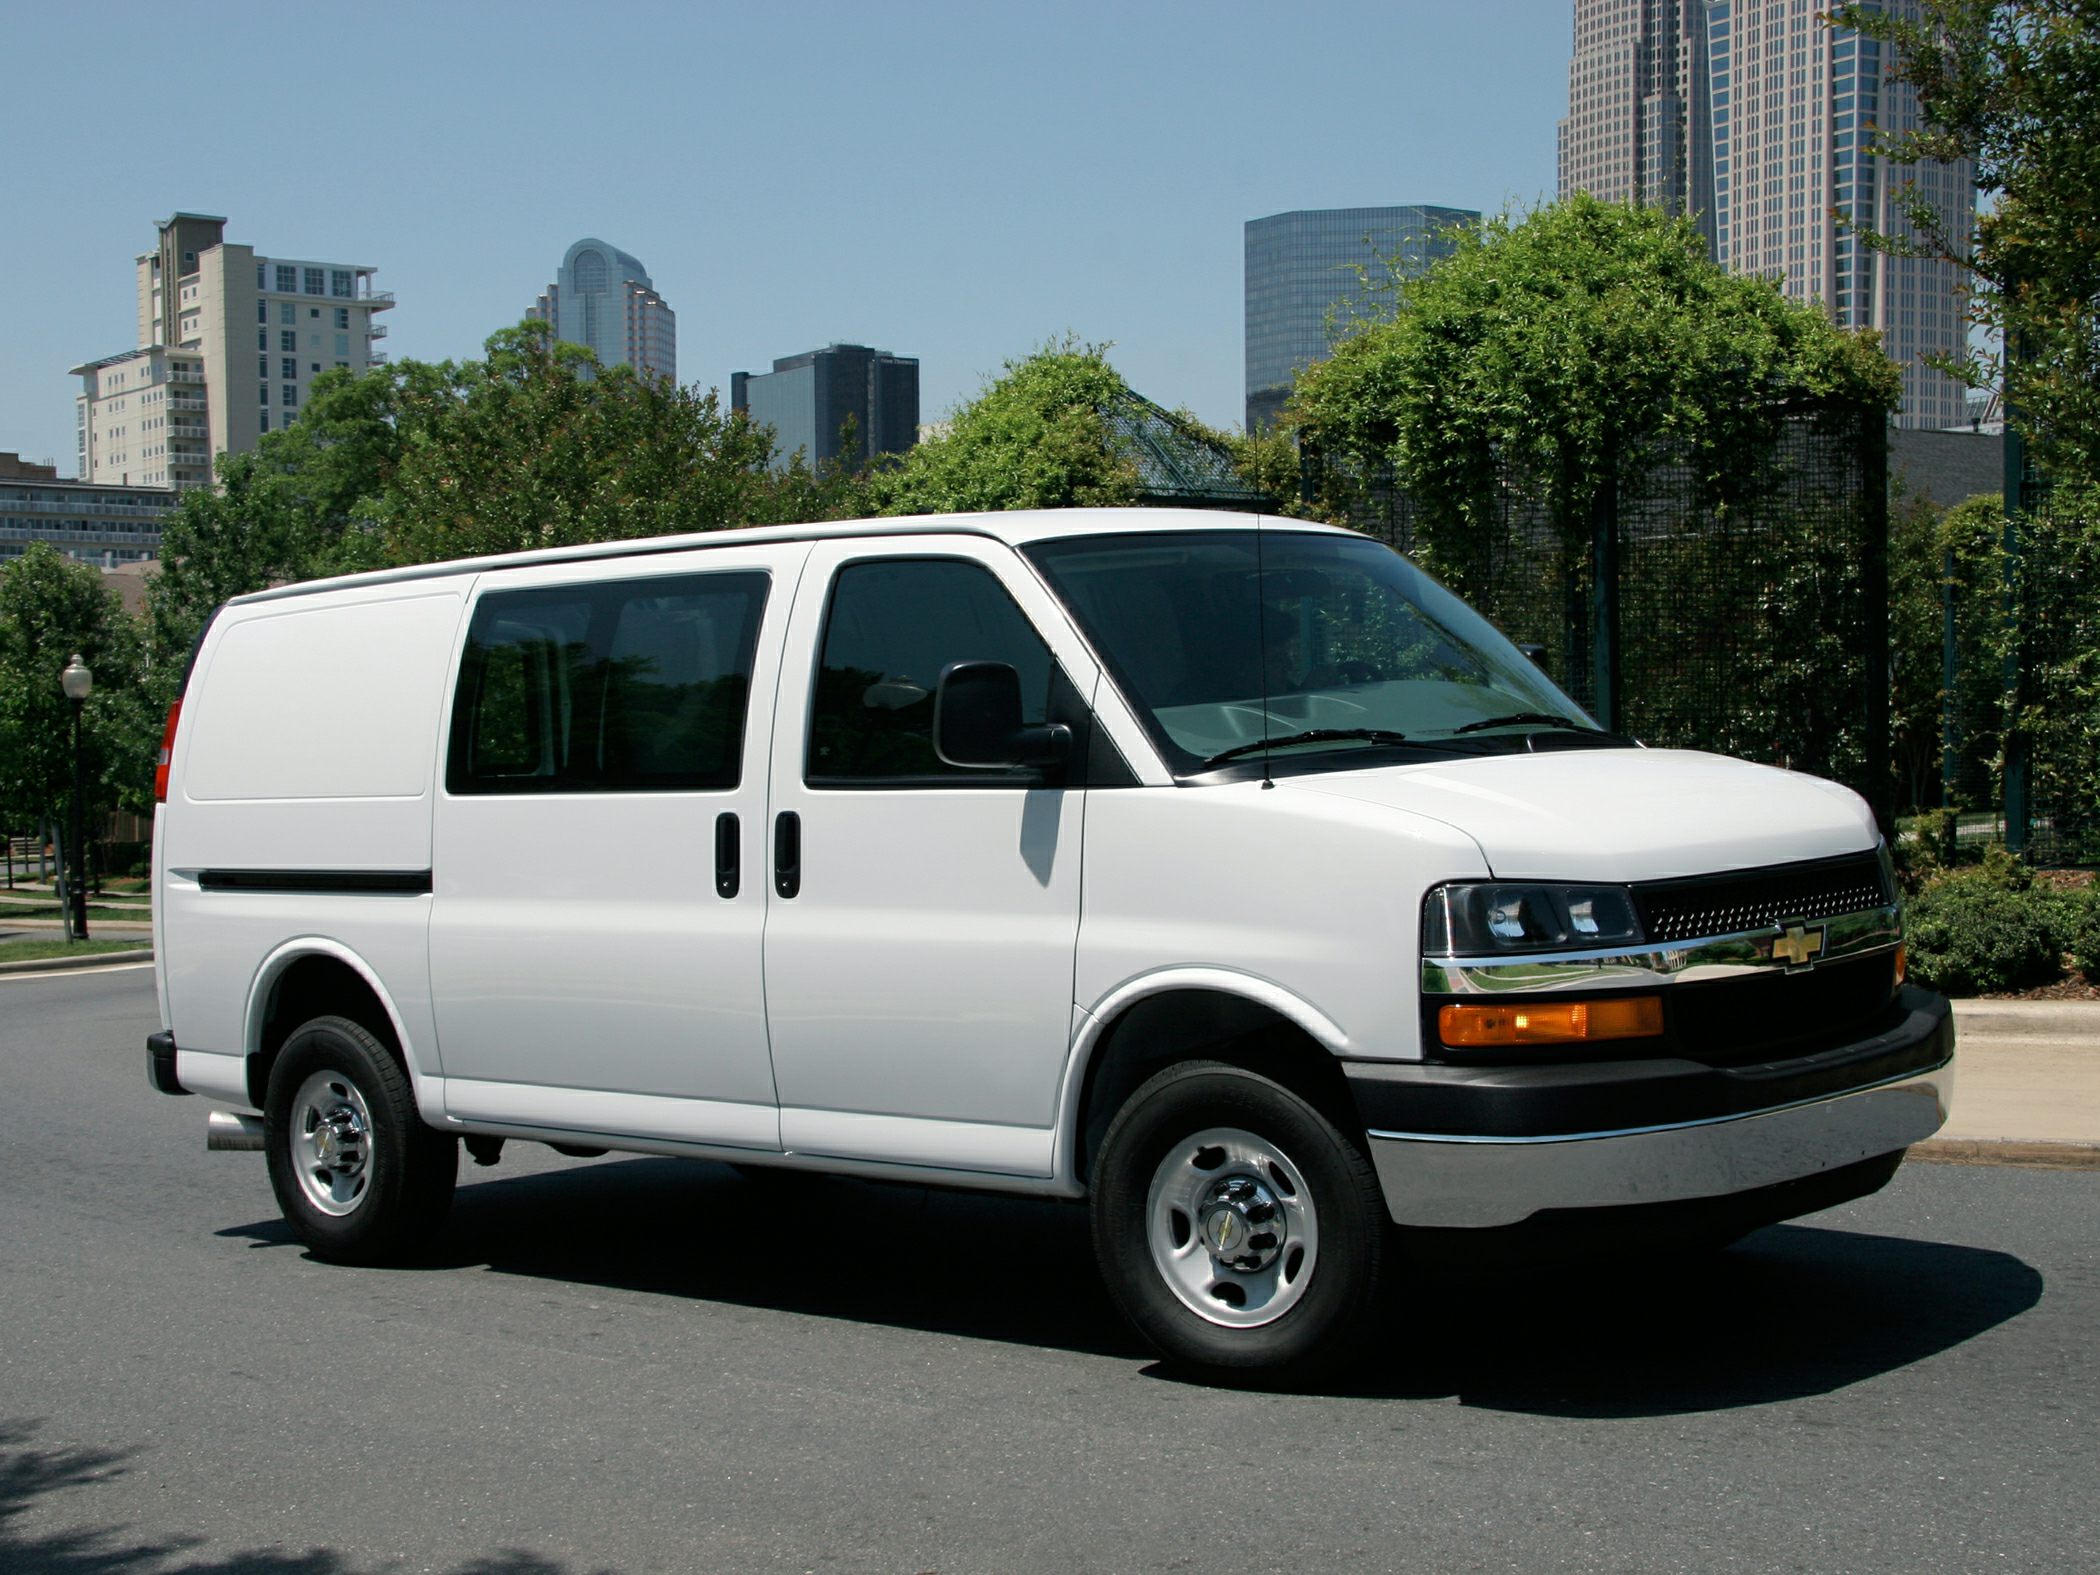 2009 Chevrolet Express 2500 Specs and 